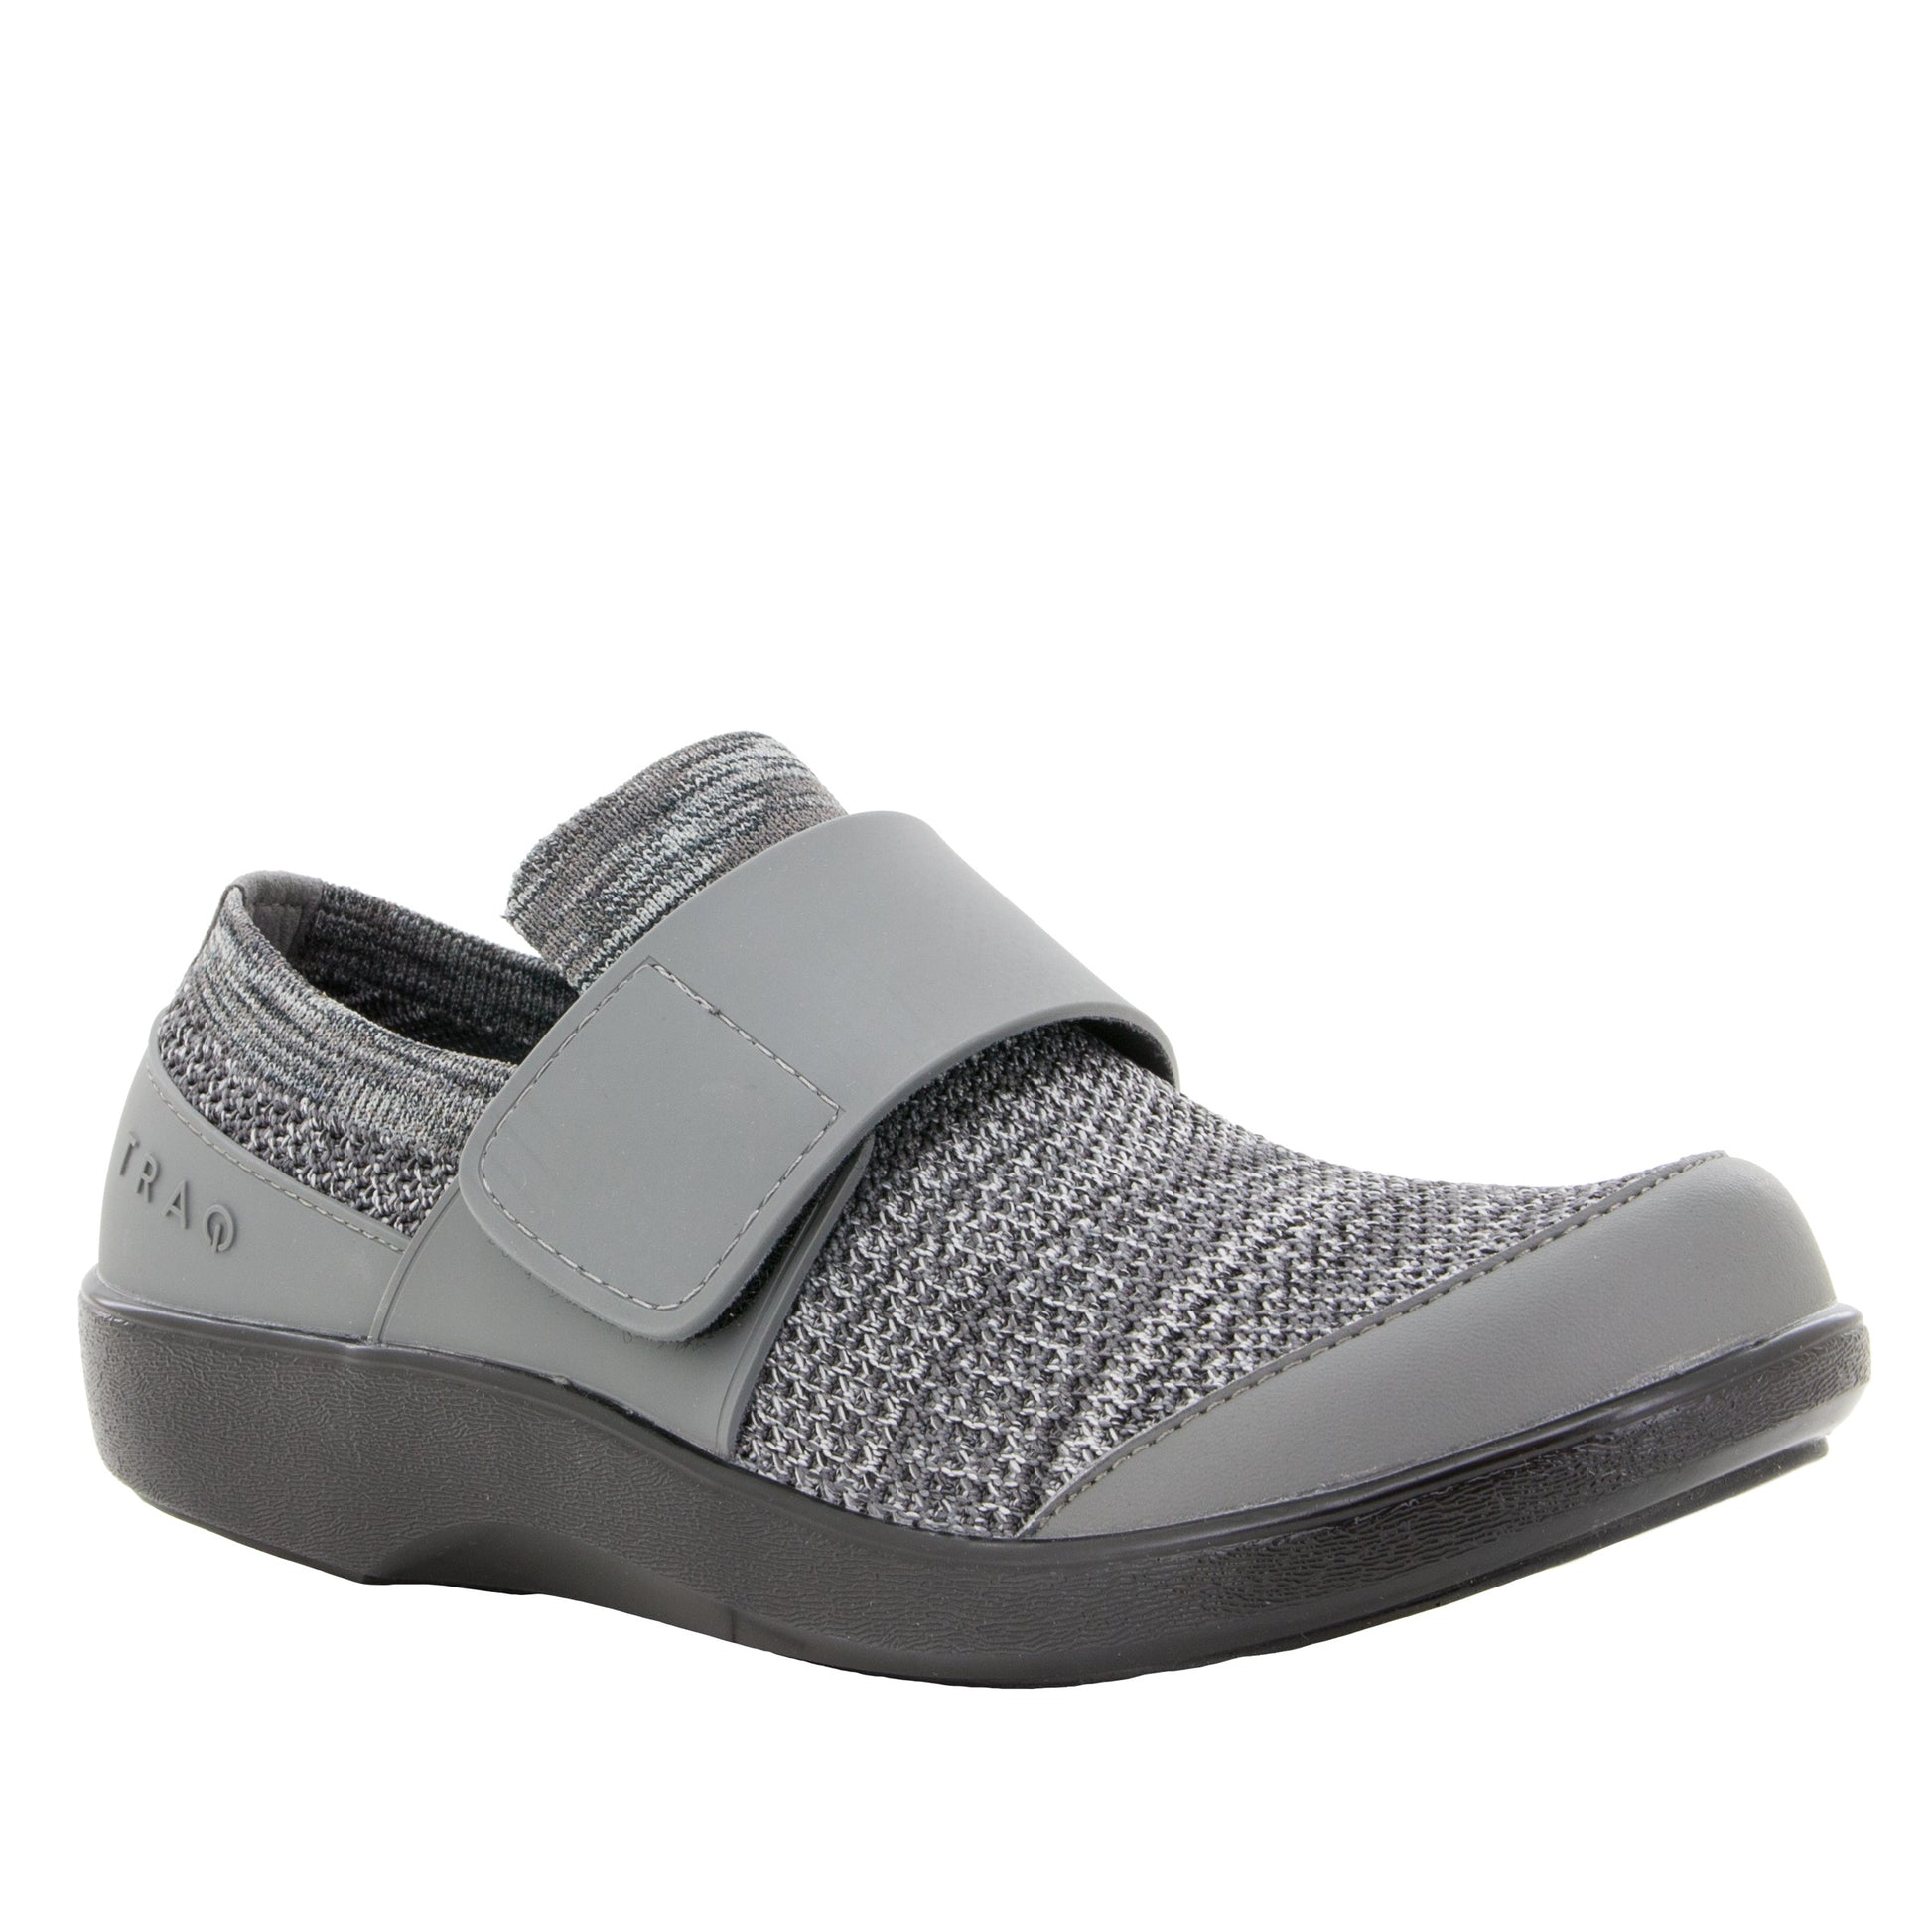 Traq Qwik by Alegria in Charcoal at Parker's Clothing and Shoes.